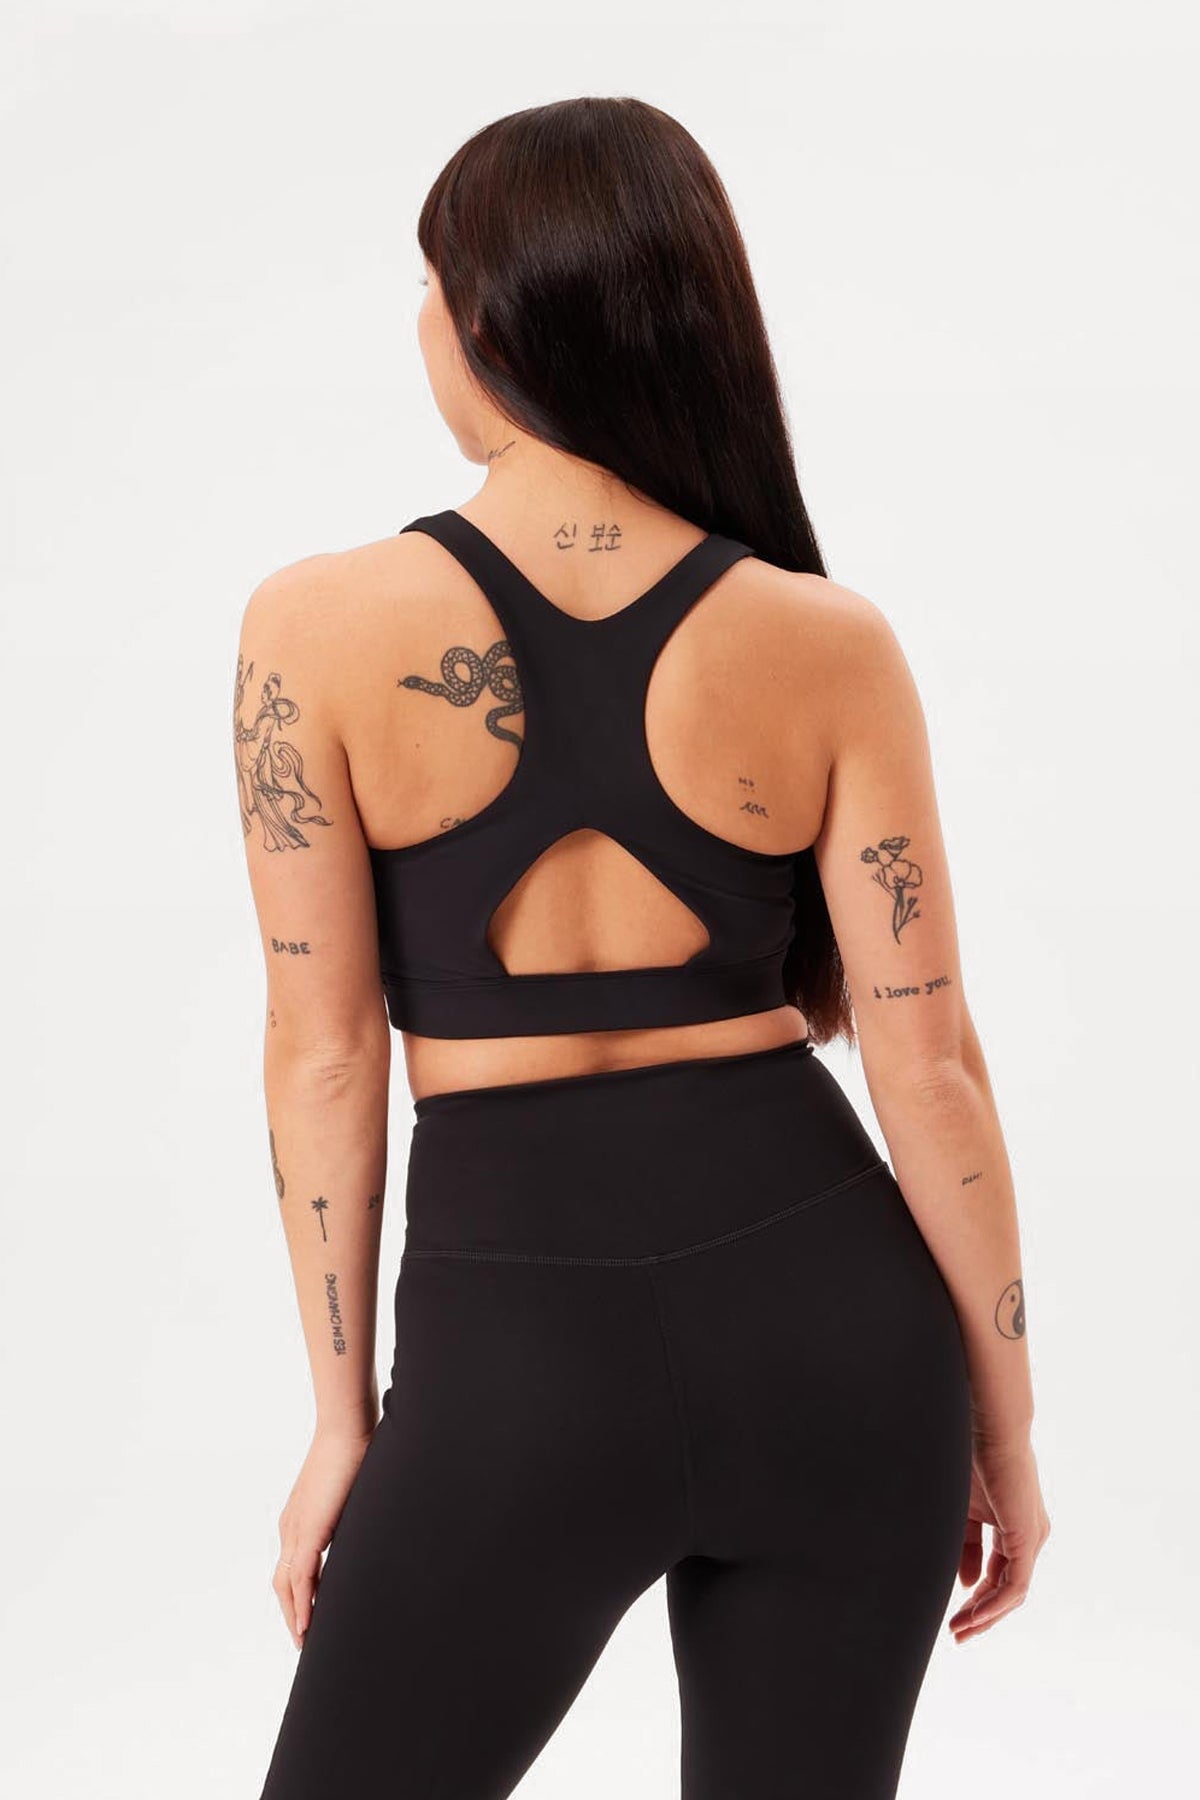 Black Elastic Girlfriend Collective Sports Bra For Women Perfect For Gym,  Workout, And Yoga Sexy And Comfortable Satian Feminino Outfit BG50SB From  Chensuqz, $29.74